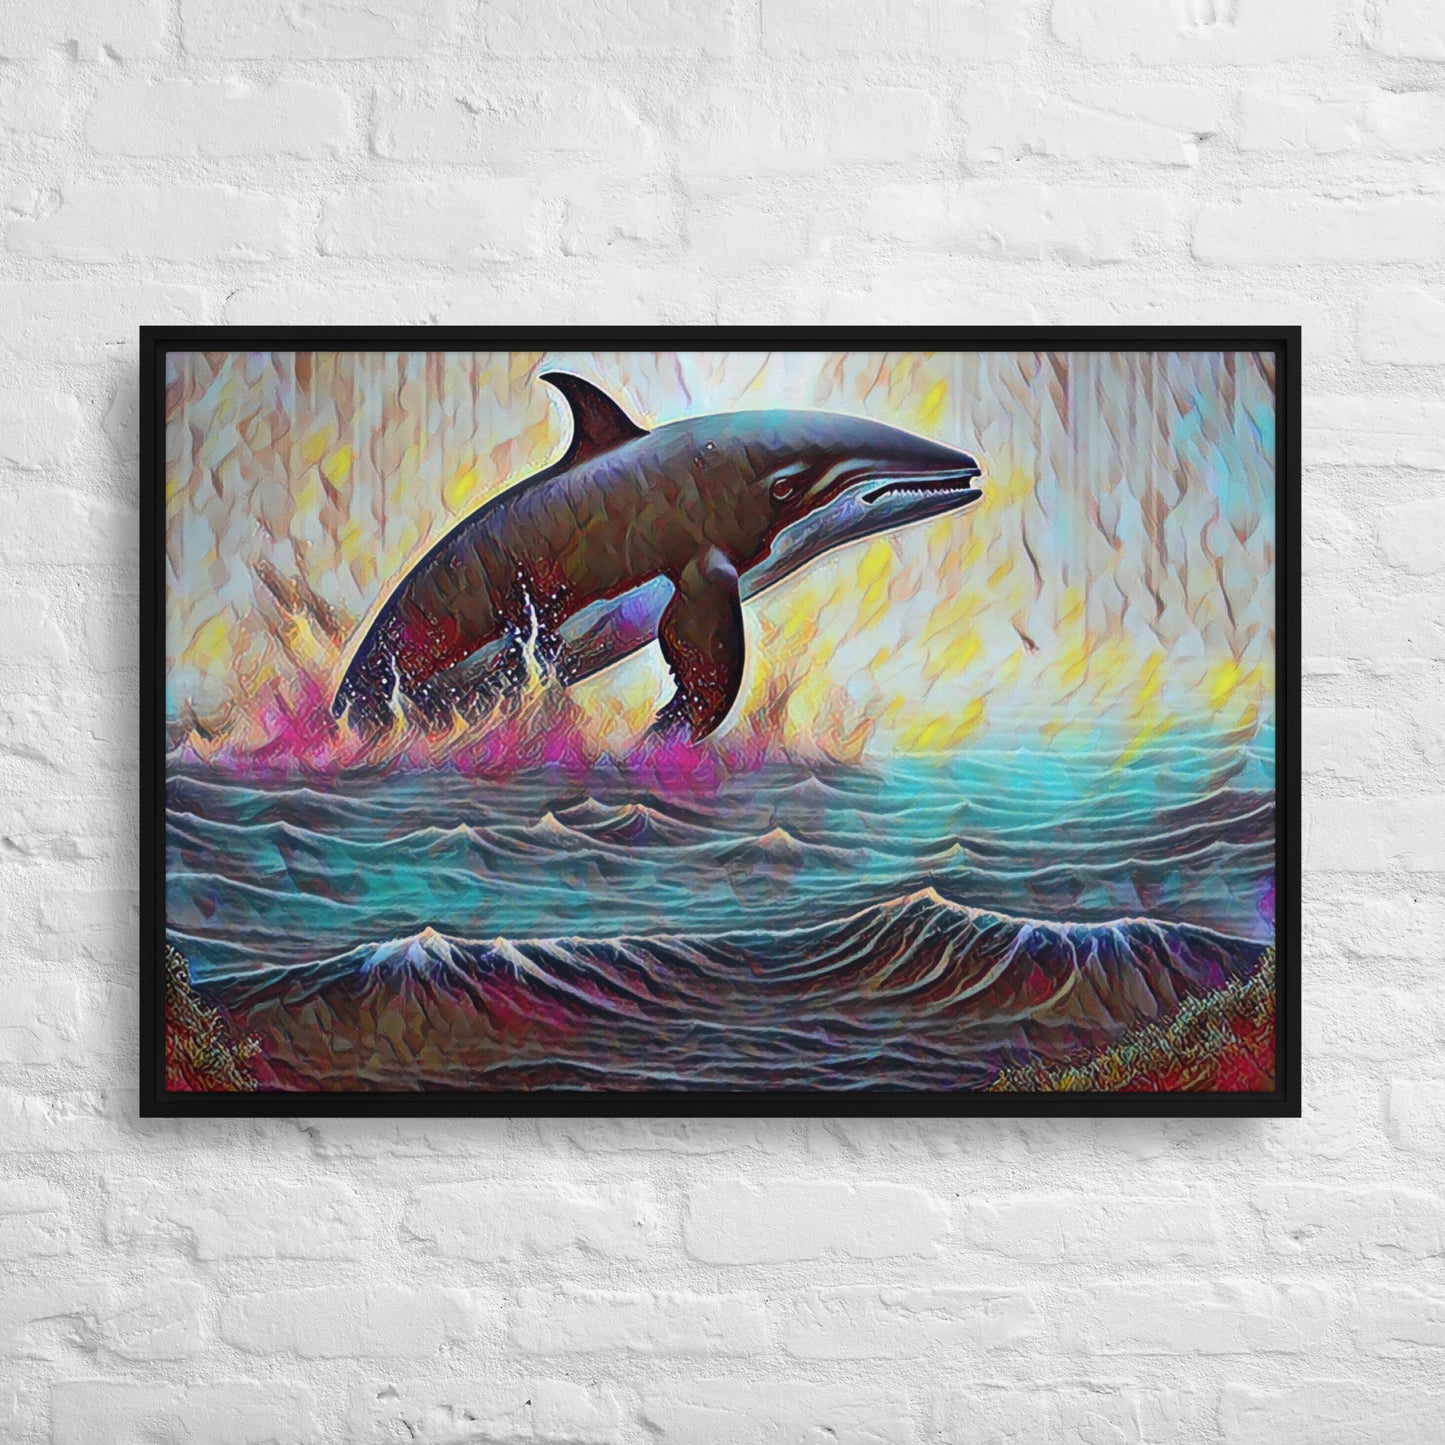 Pacific Northwest Orca - Digital Art - Framed canvas - FREE SHIPPING